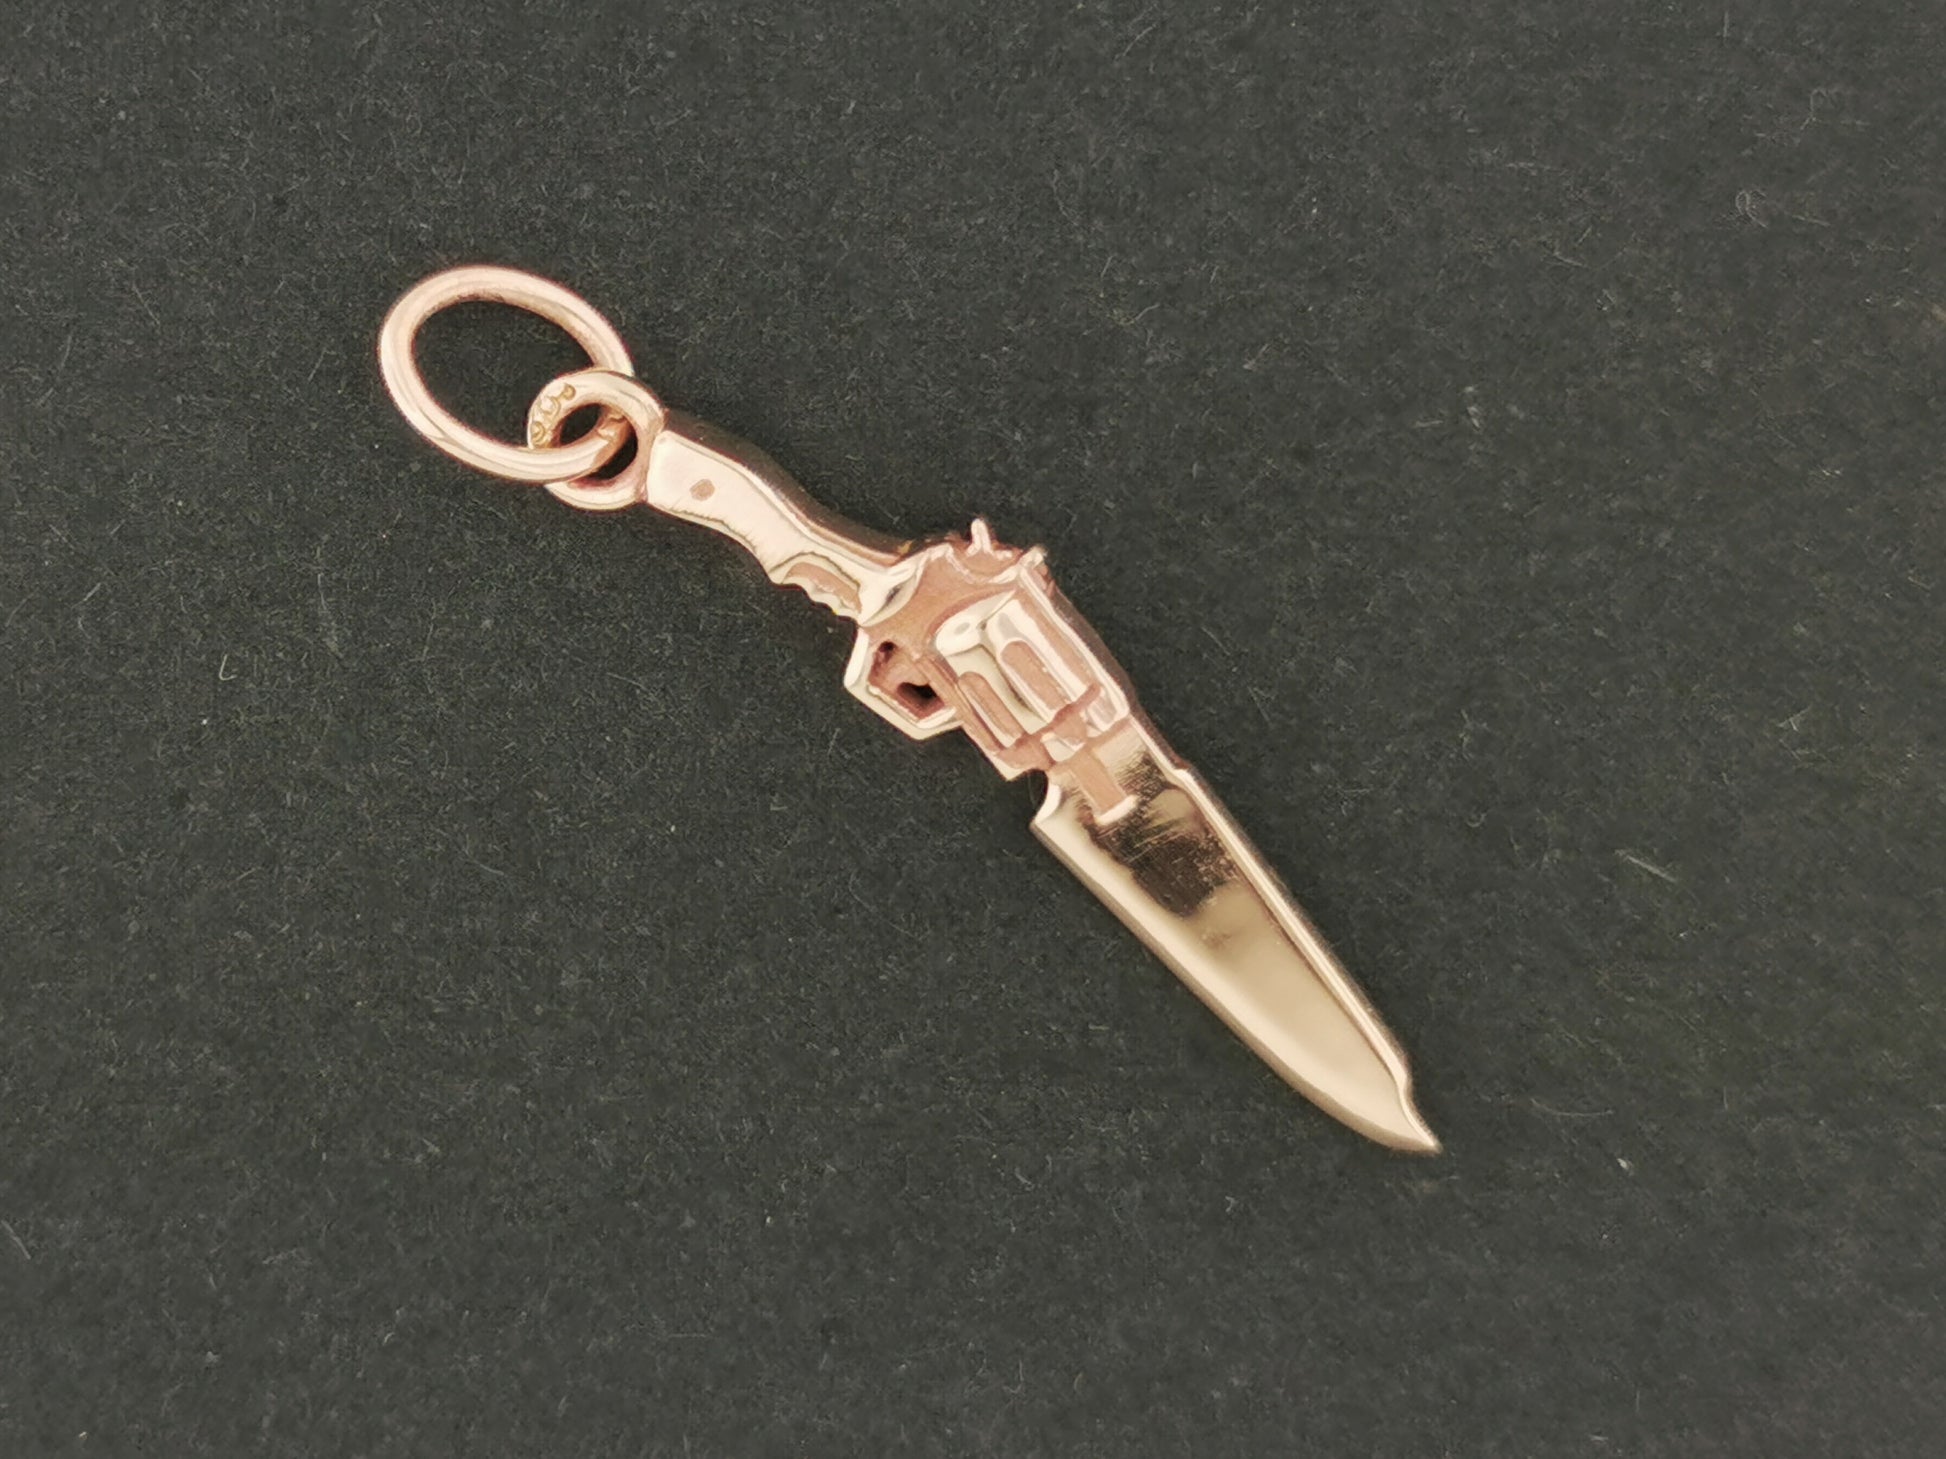 Final Fantasy 8 Gunblade Charm in Sterling Silver or Antique Bronze, FF8 Squall Pendant, Final Fantasy VIII Pendant, Final Fantasy Jewelry, final fantasy pendant, FF8 bronze charm, FF8 Gunblade pendant, bronze Gunblade pendant, gamer girl jewelry